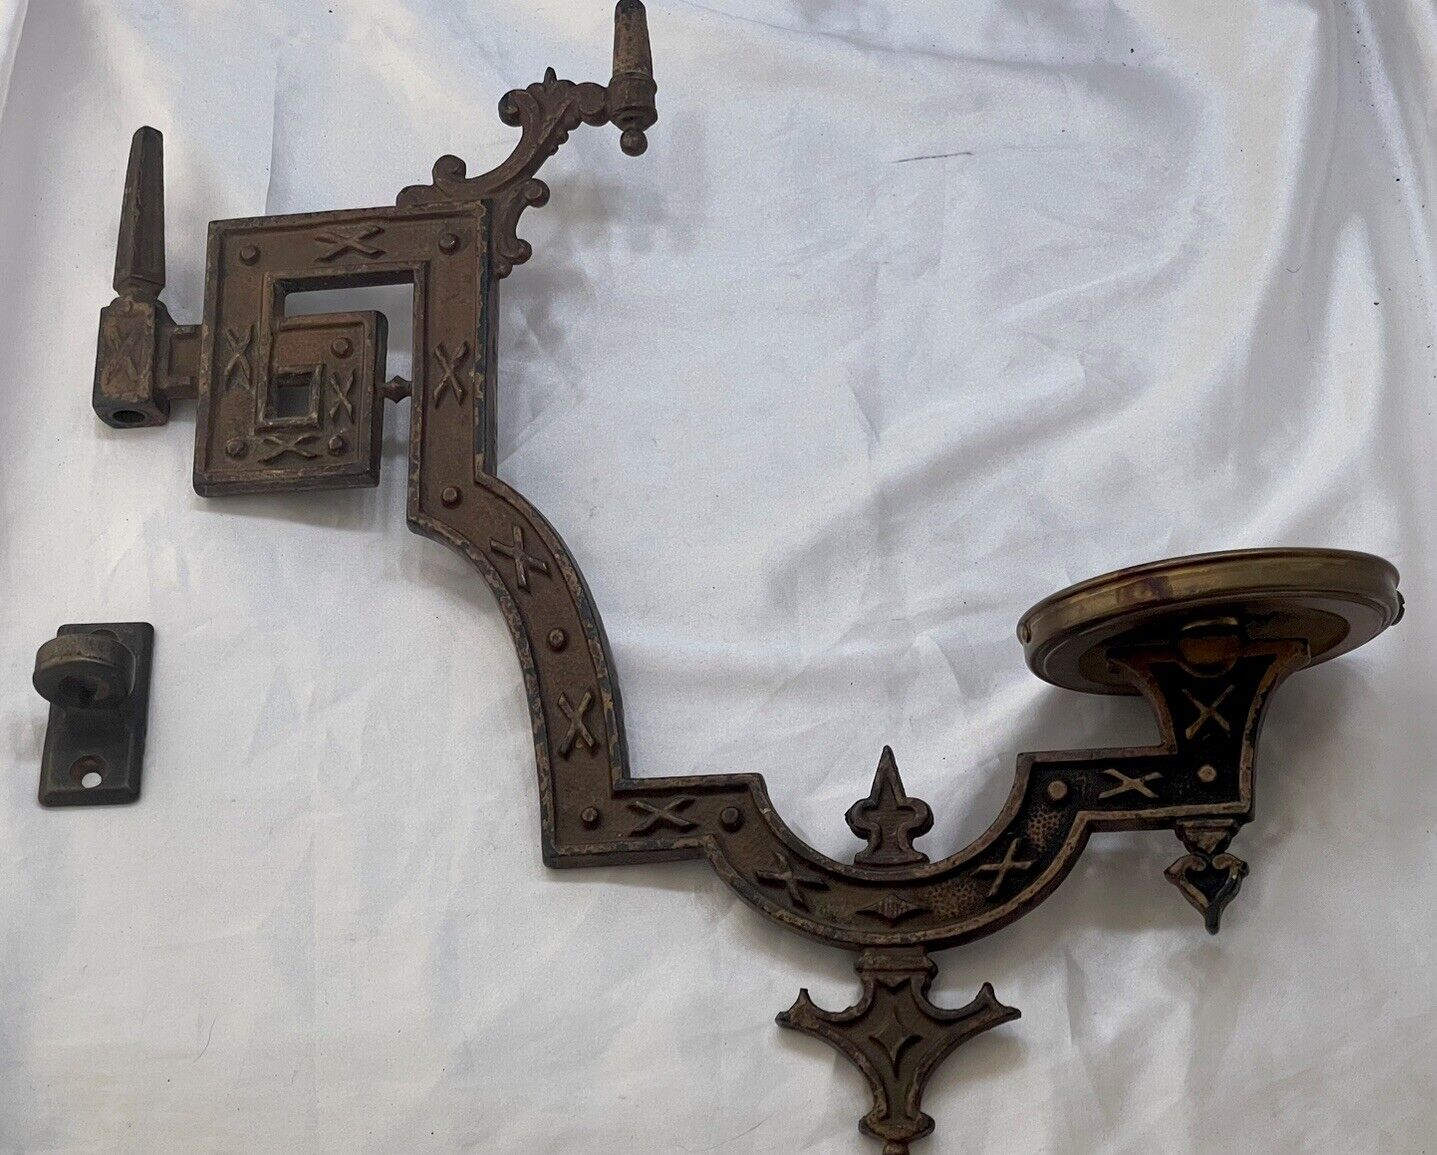 CAST IRON Victorian OIL Lamp WALL Mount Sconce BRACKET Swing Arm EARLY AMERICAN